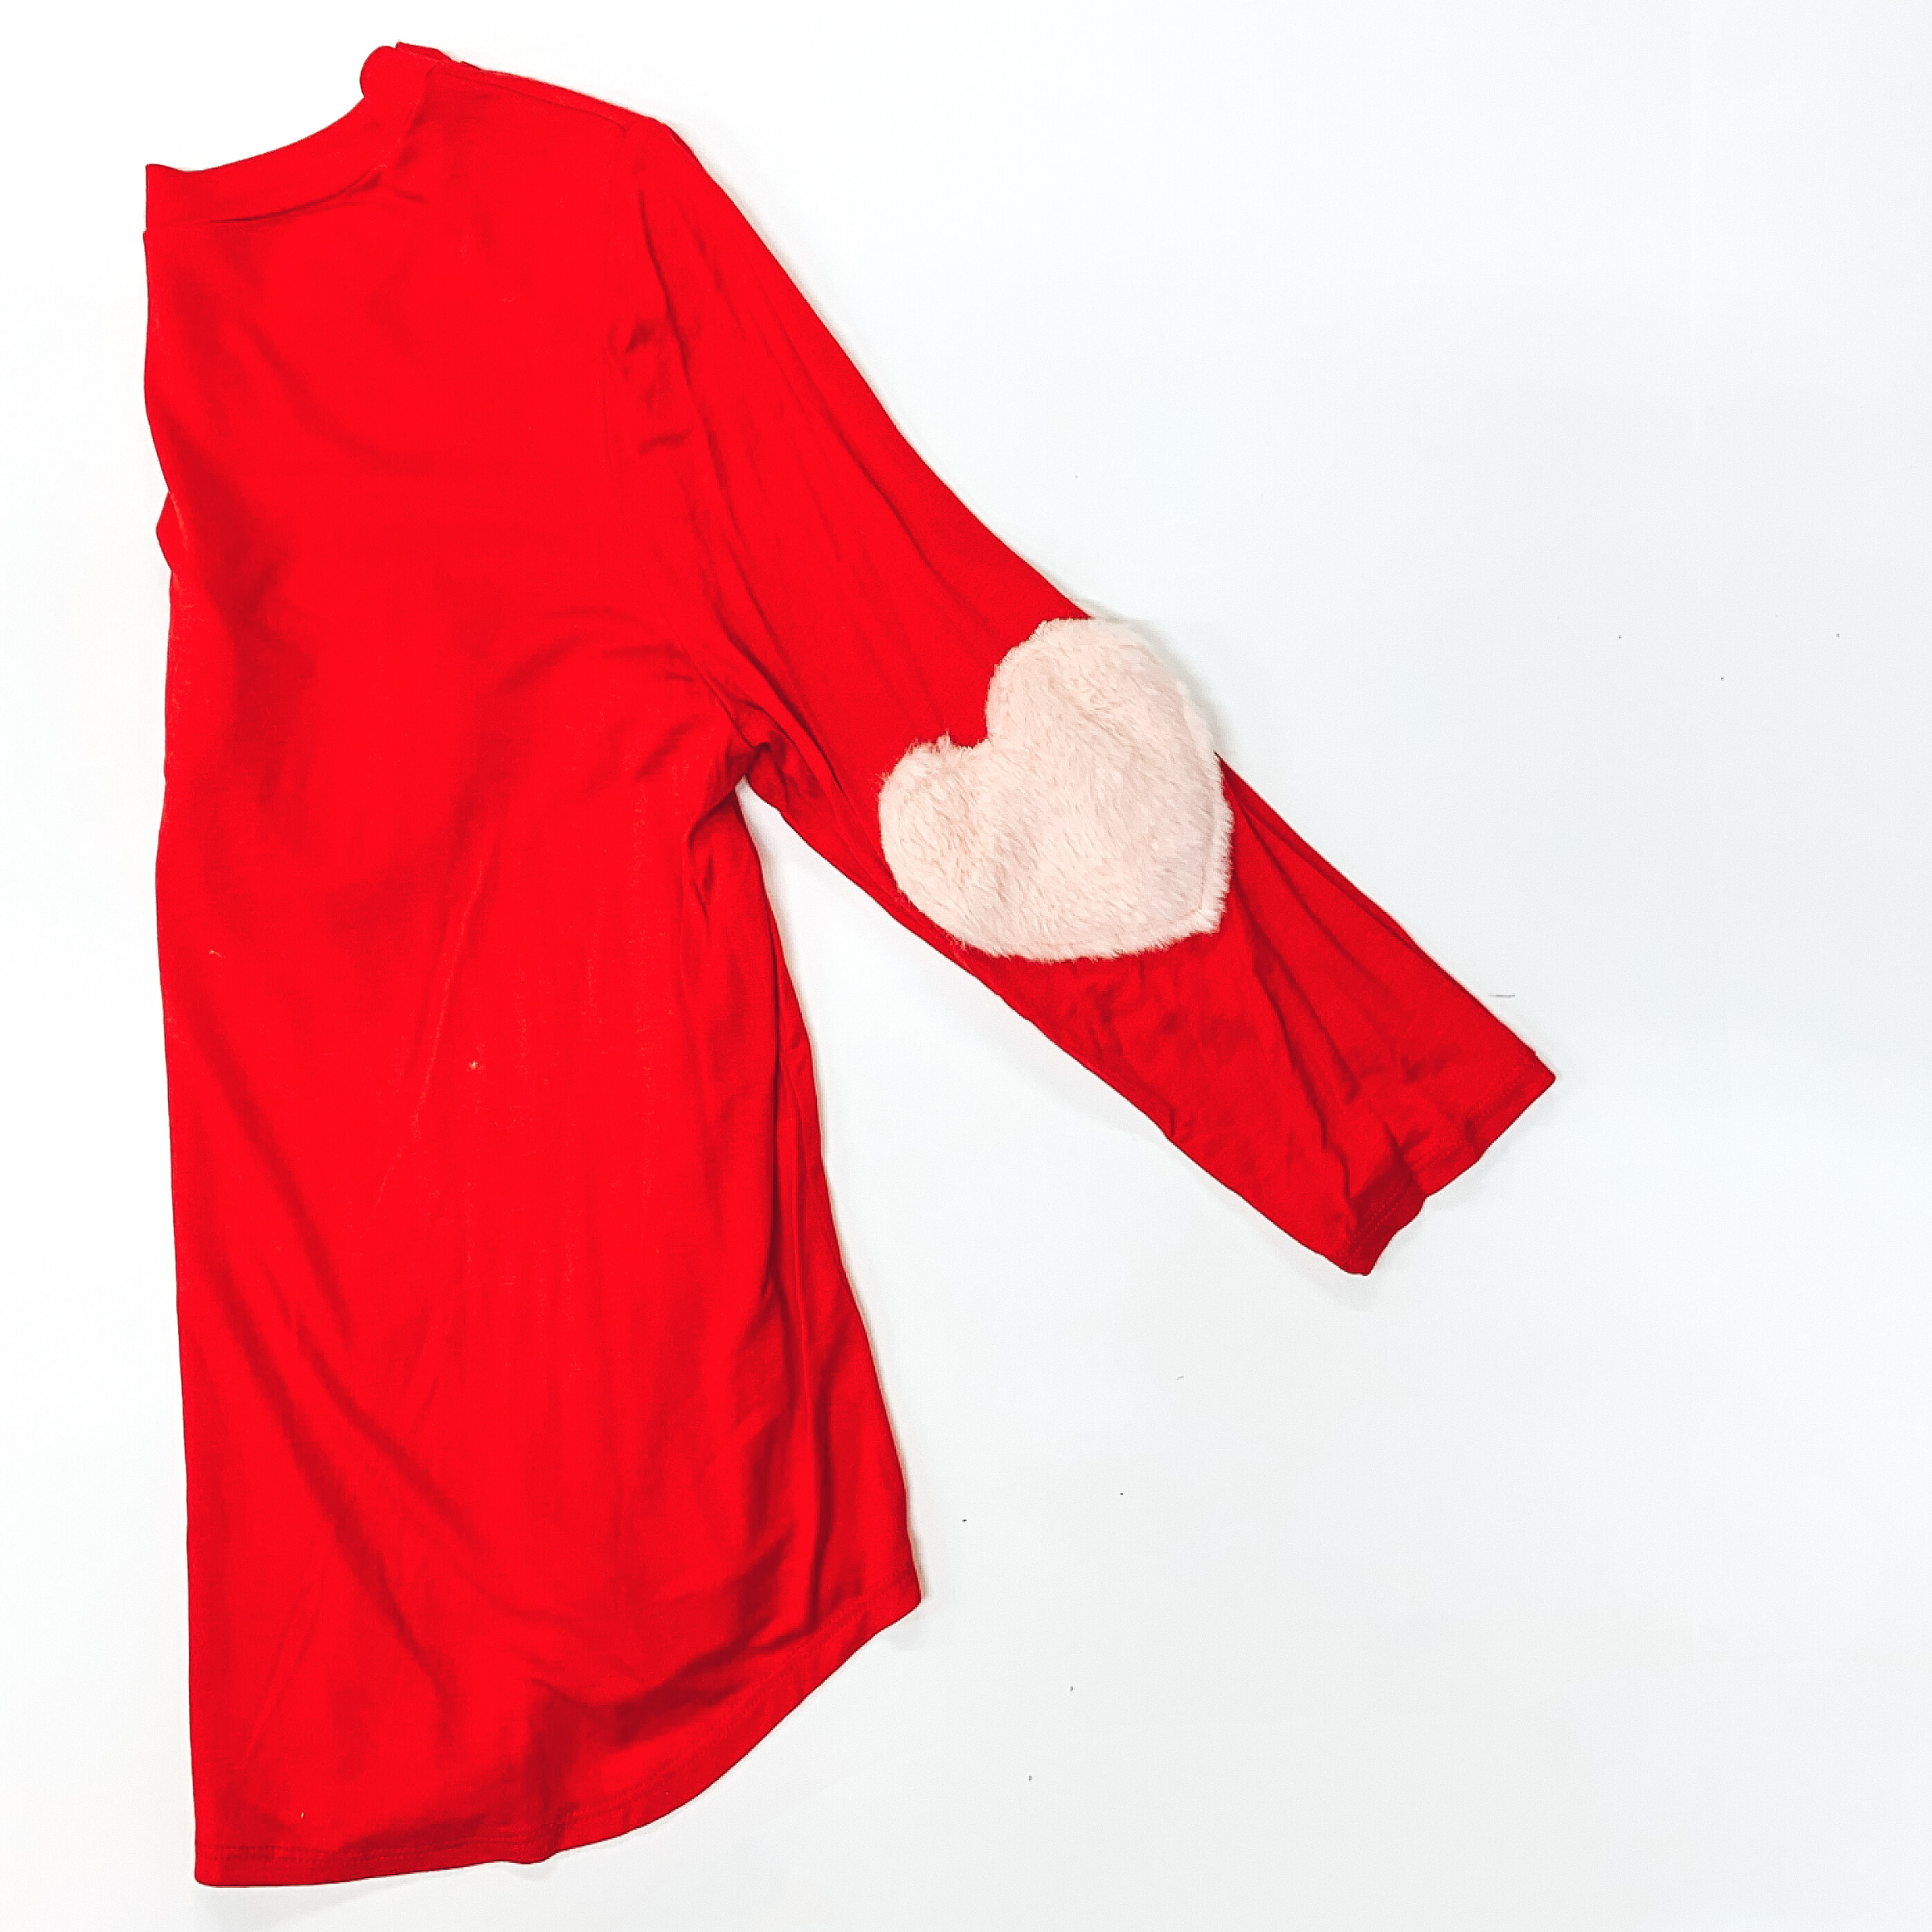 Red 3/4 Sleeve Top with White Furry Hearts - Giddy Up Glamour Boutique